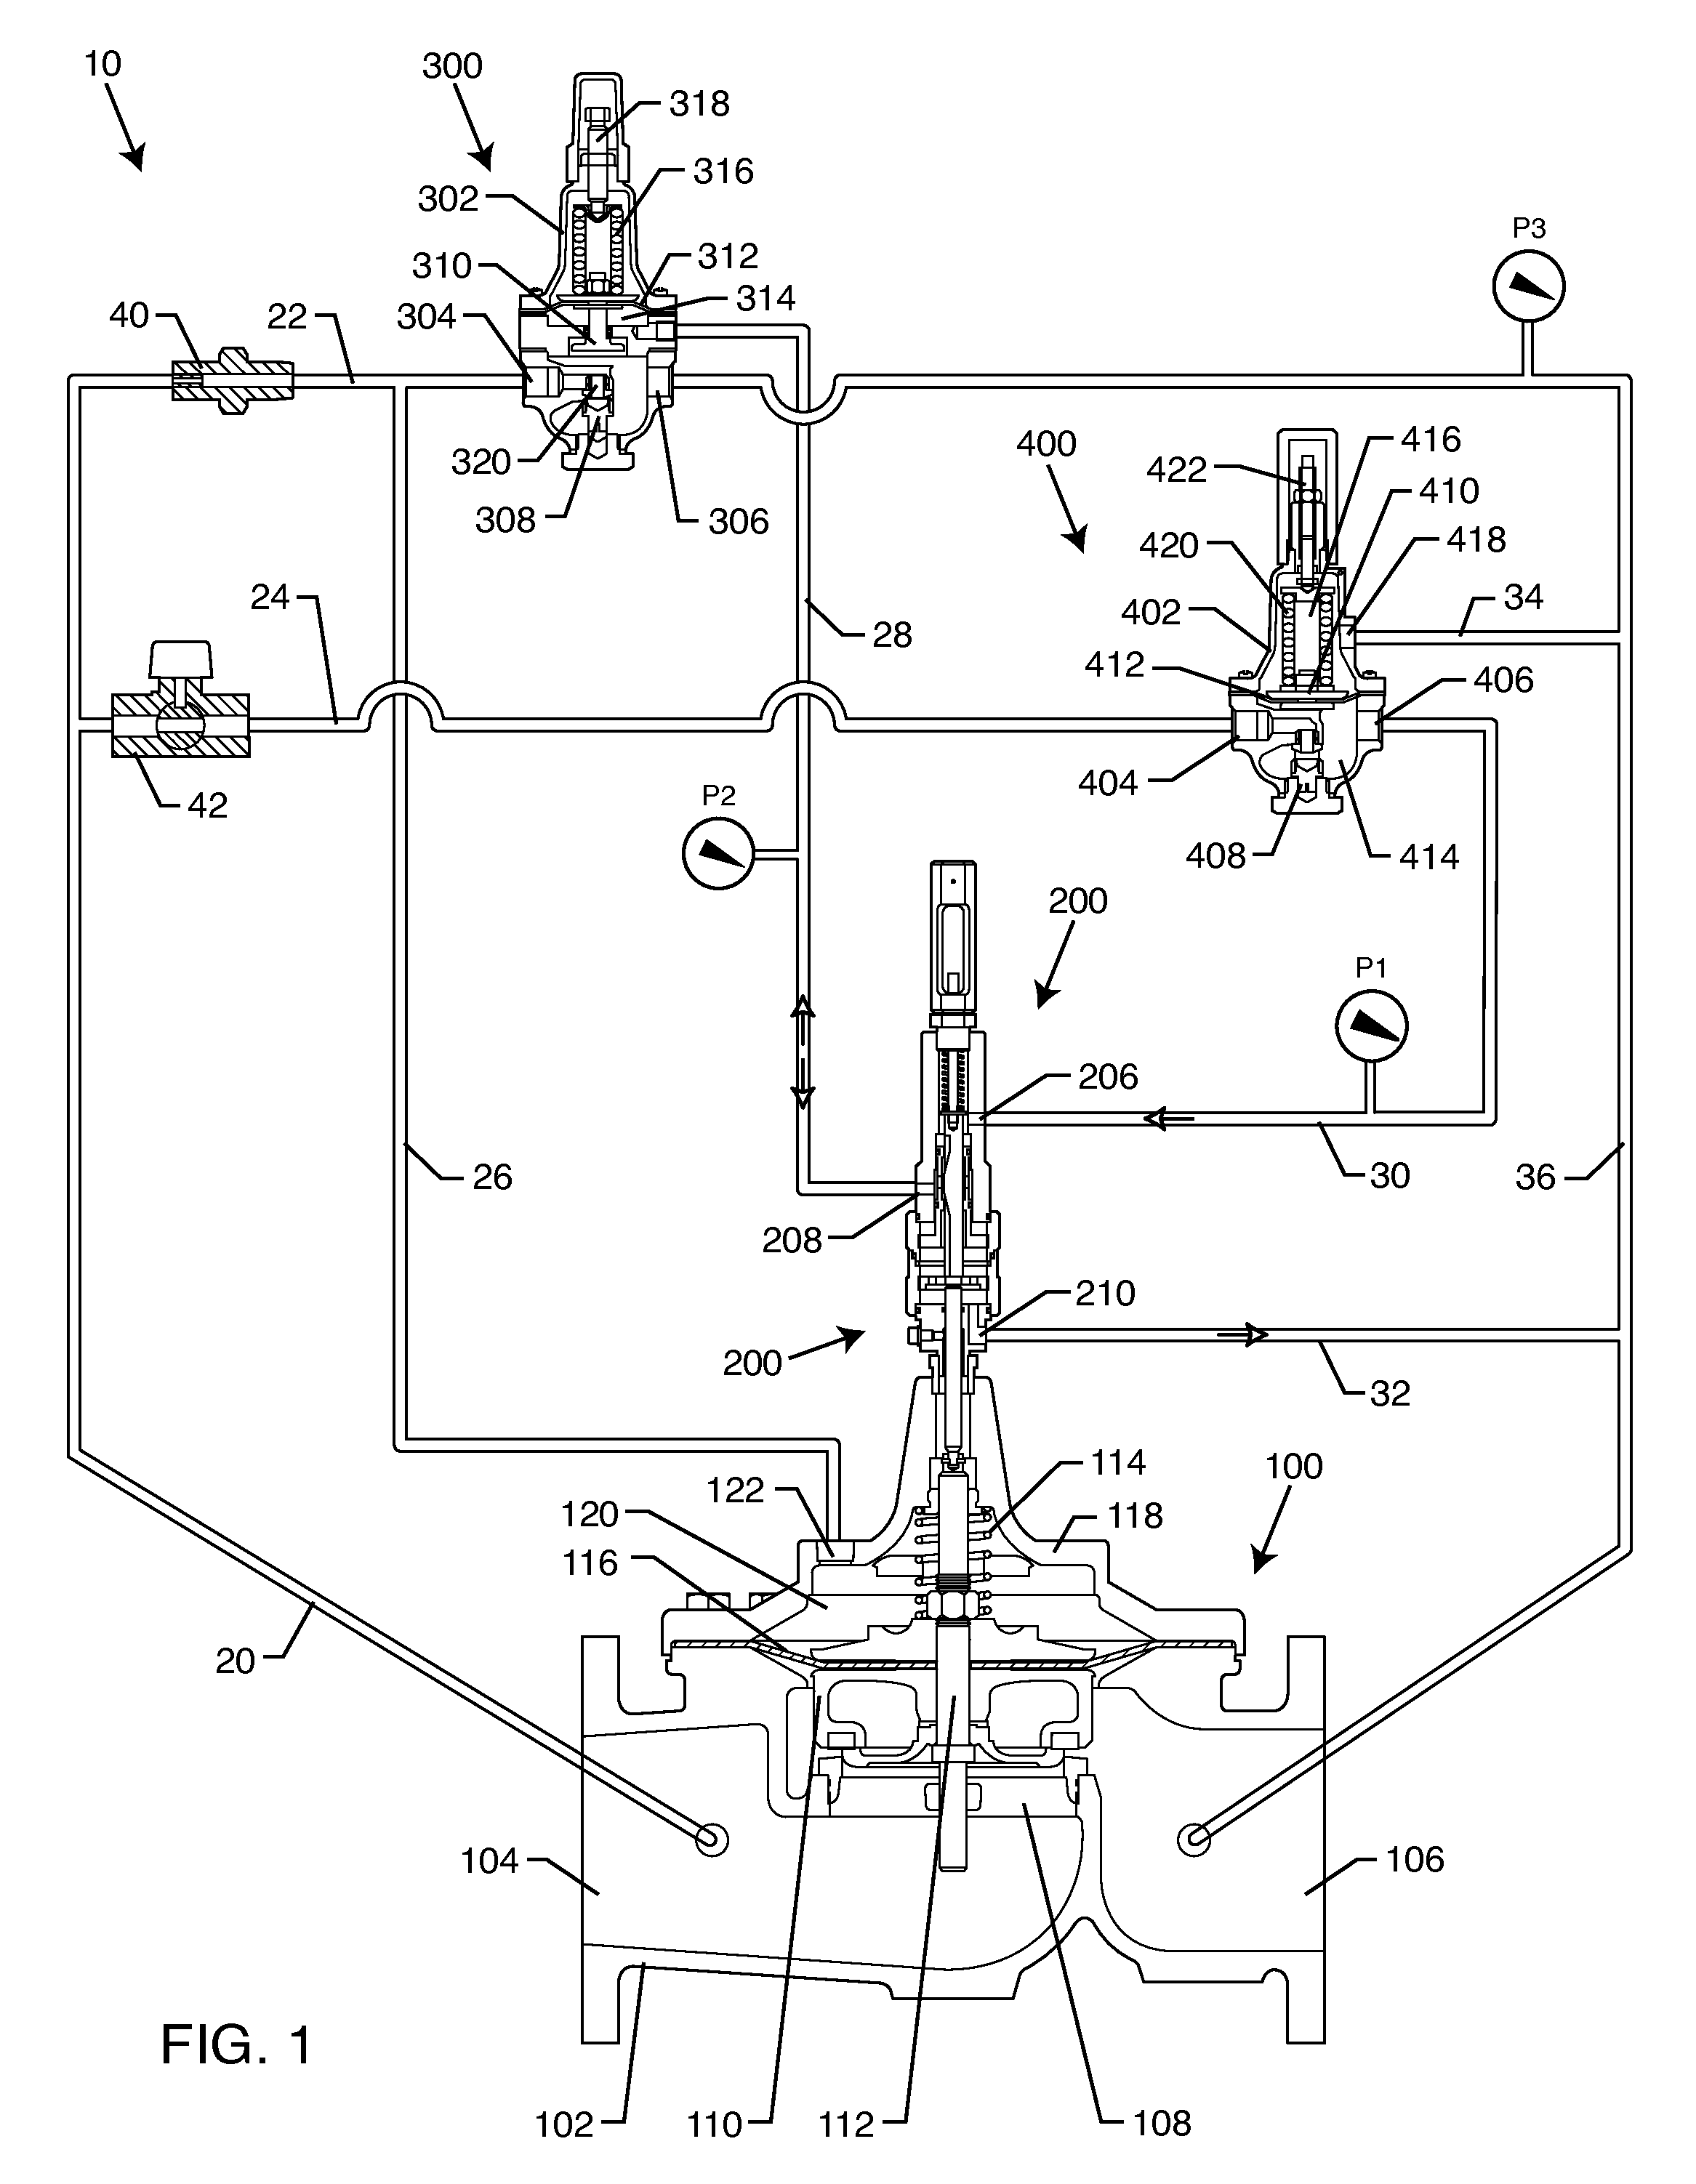 System, including a variable orifice assembly, for hydraulically managing pressure in a fluid distribution system between pressure set points